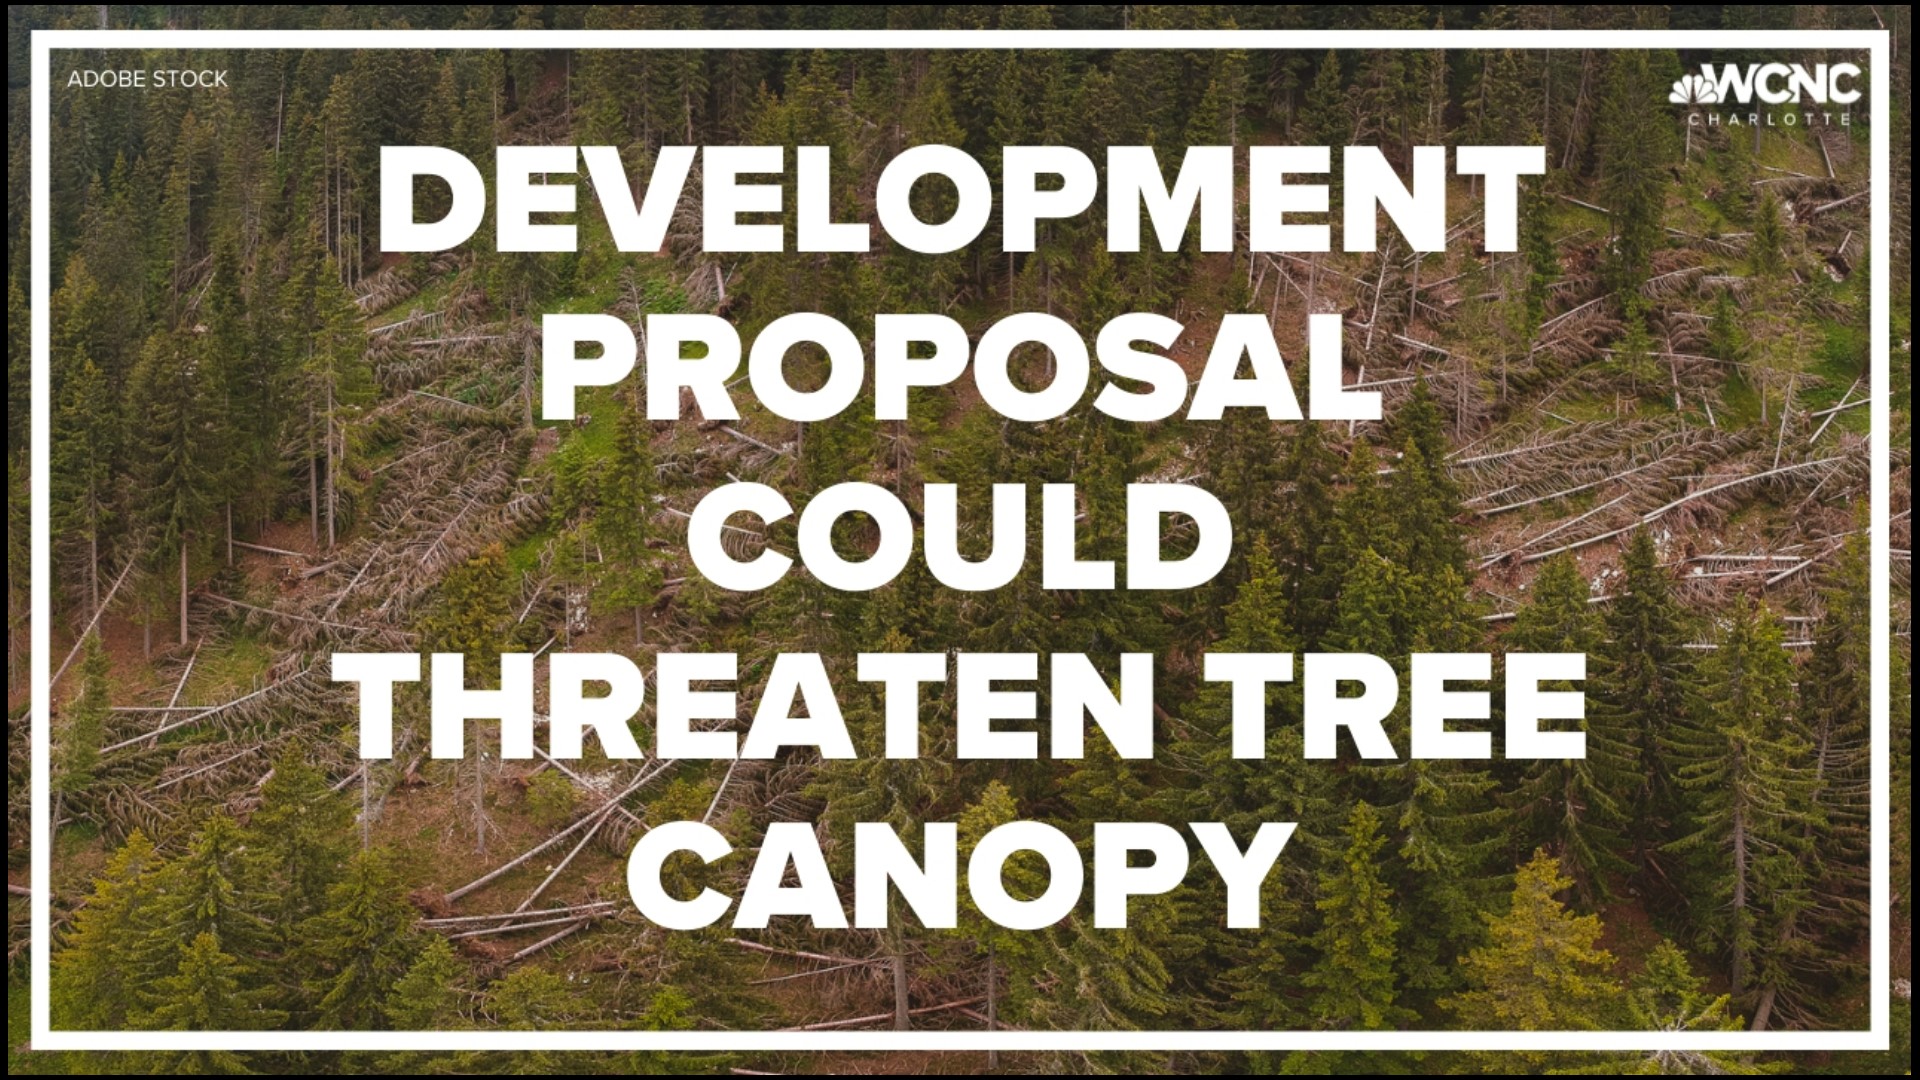 Article 20 of the UDO sets regulations for removing large trees, but the tree canopy is rapidly declining